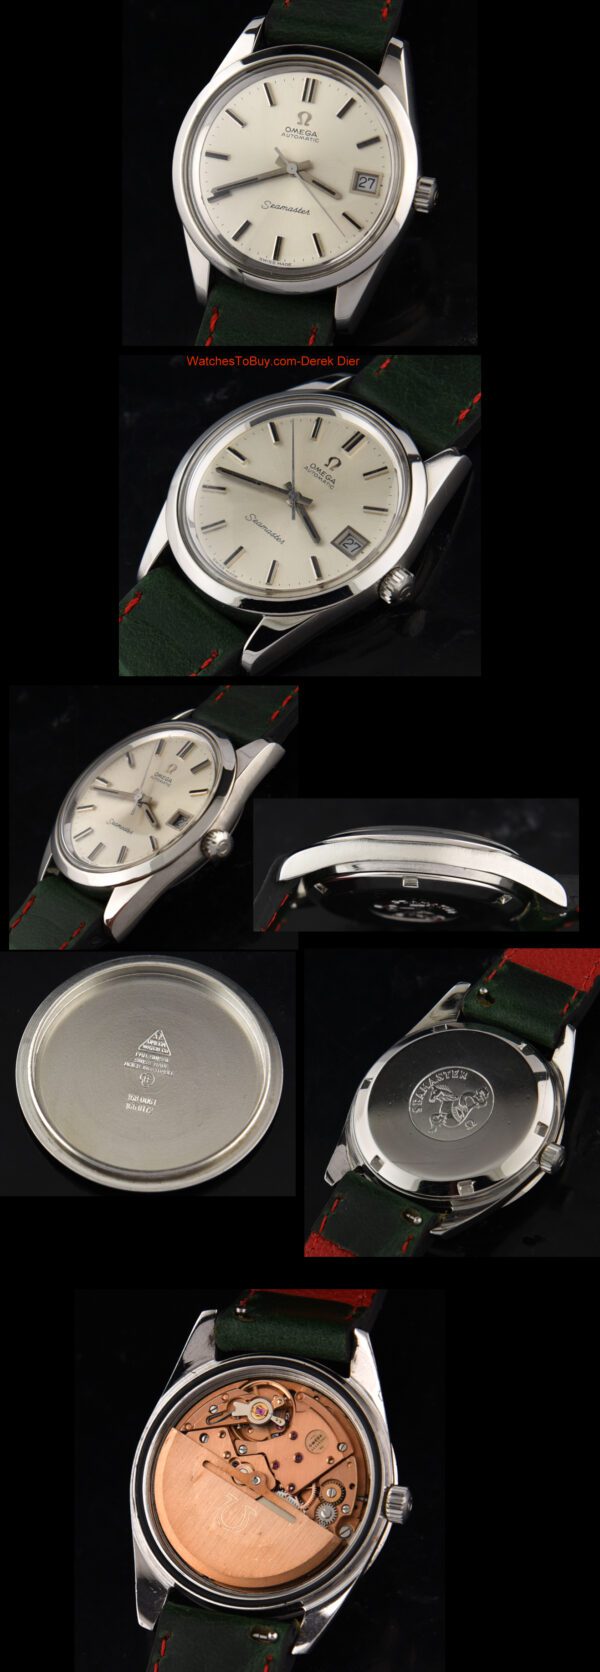 1972 Omega 35mm Seamaster stainless steel watch with original large dial, case, winding crown, hesalite crystal, and caliber 1012 movement.